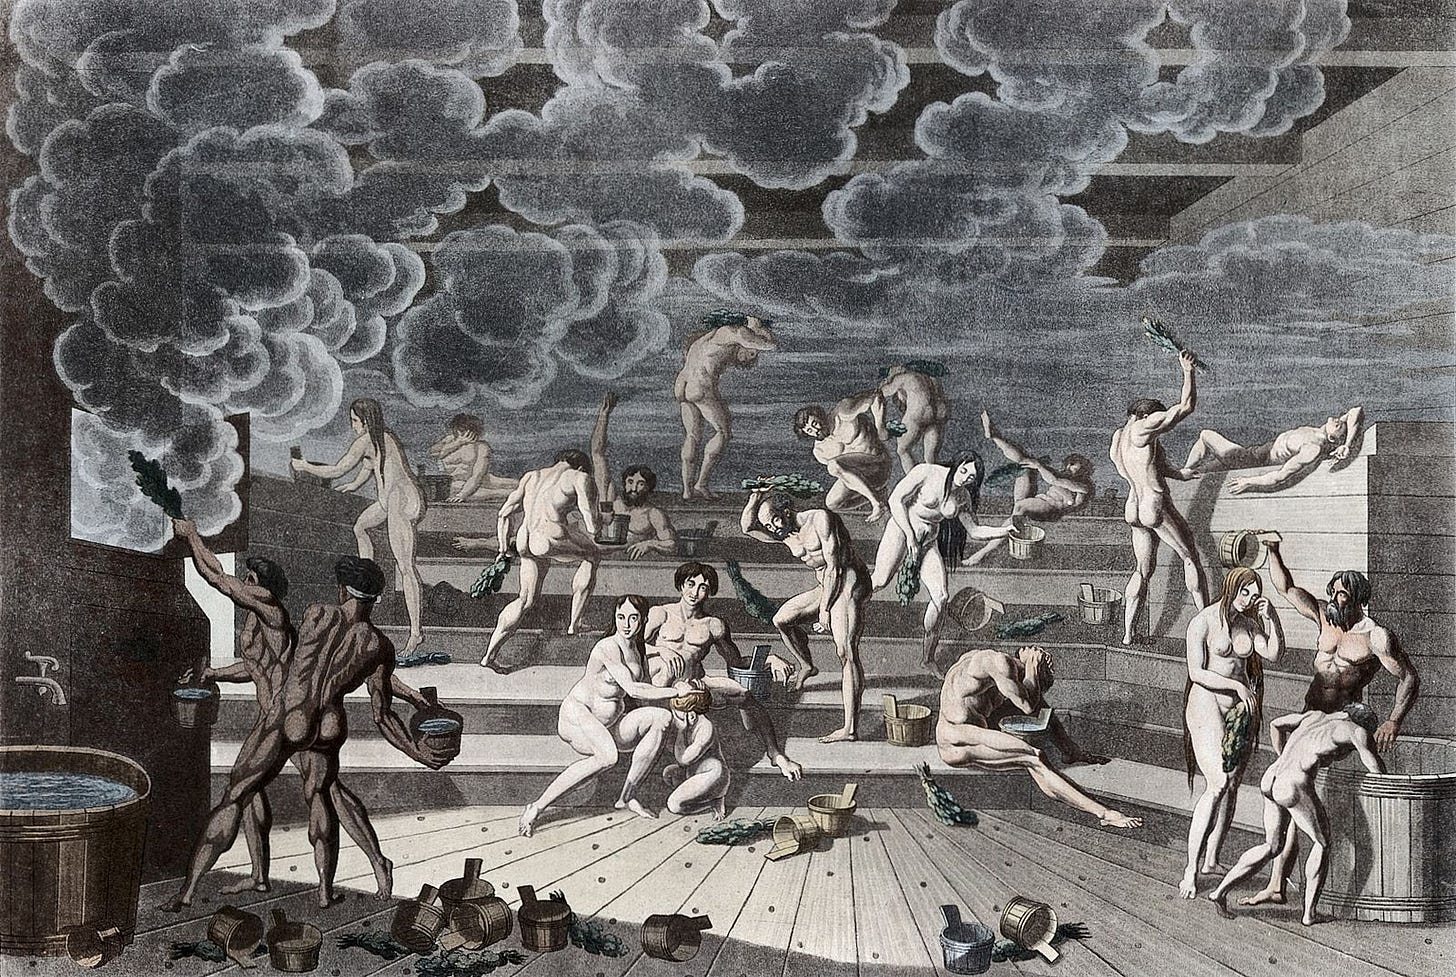 Naked men and women flogging each other with sprigs in a steamy bathhouse